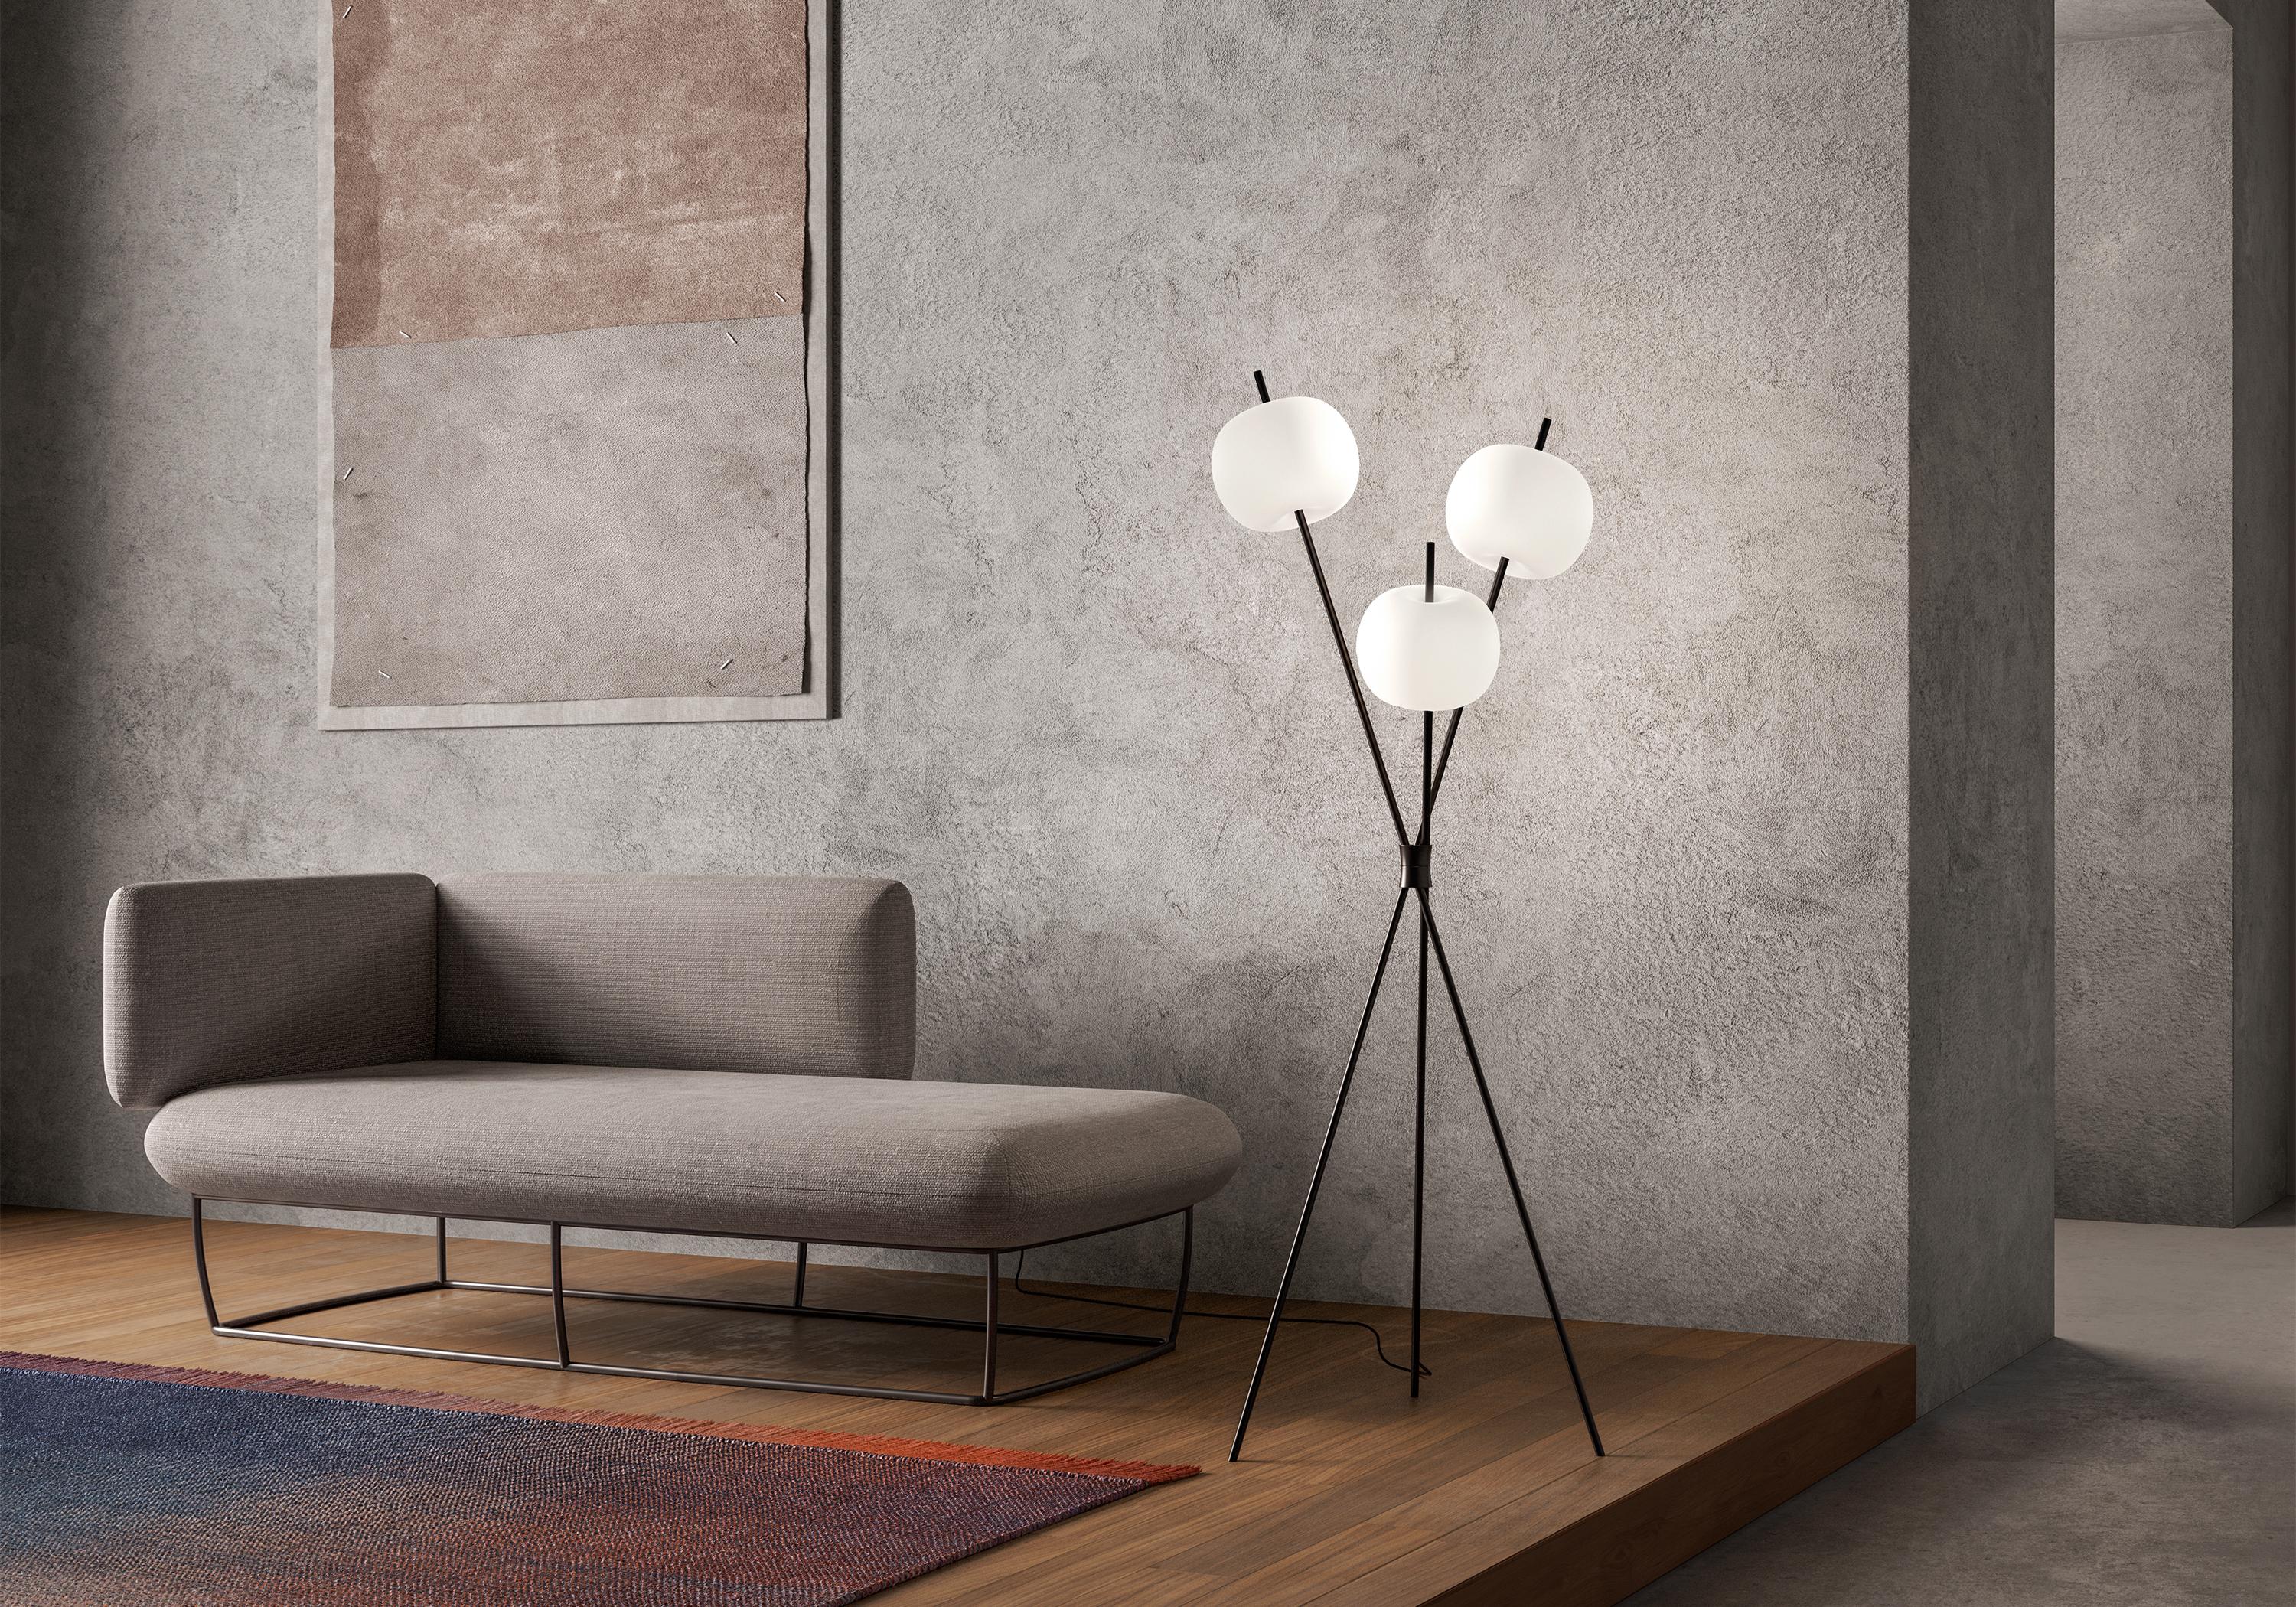 KUSHI FLOOR Copper Finish

Travel, explore and get inspired. Kushi, the traditional Japanese skewer, becomes an original floor lamp. Three slim rods and three glass diffusers are intertwined. Elegant, welcoming atmospheres for the contract world